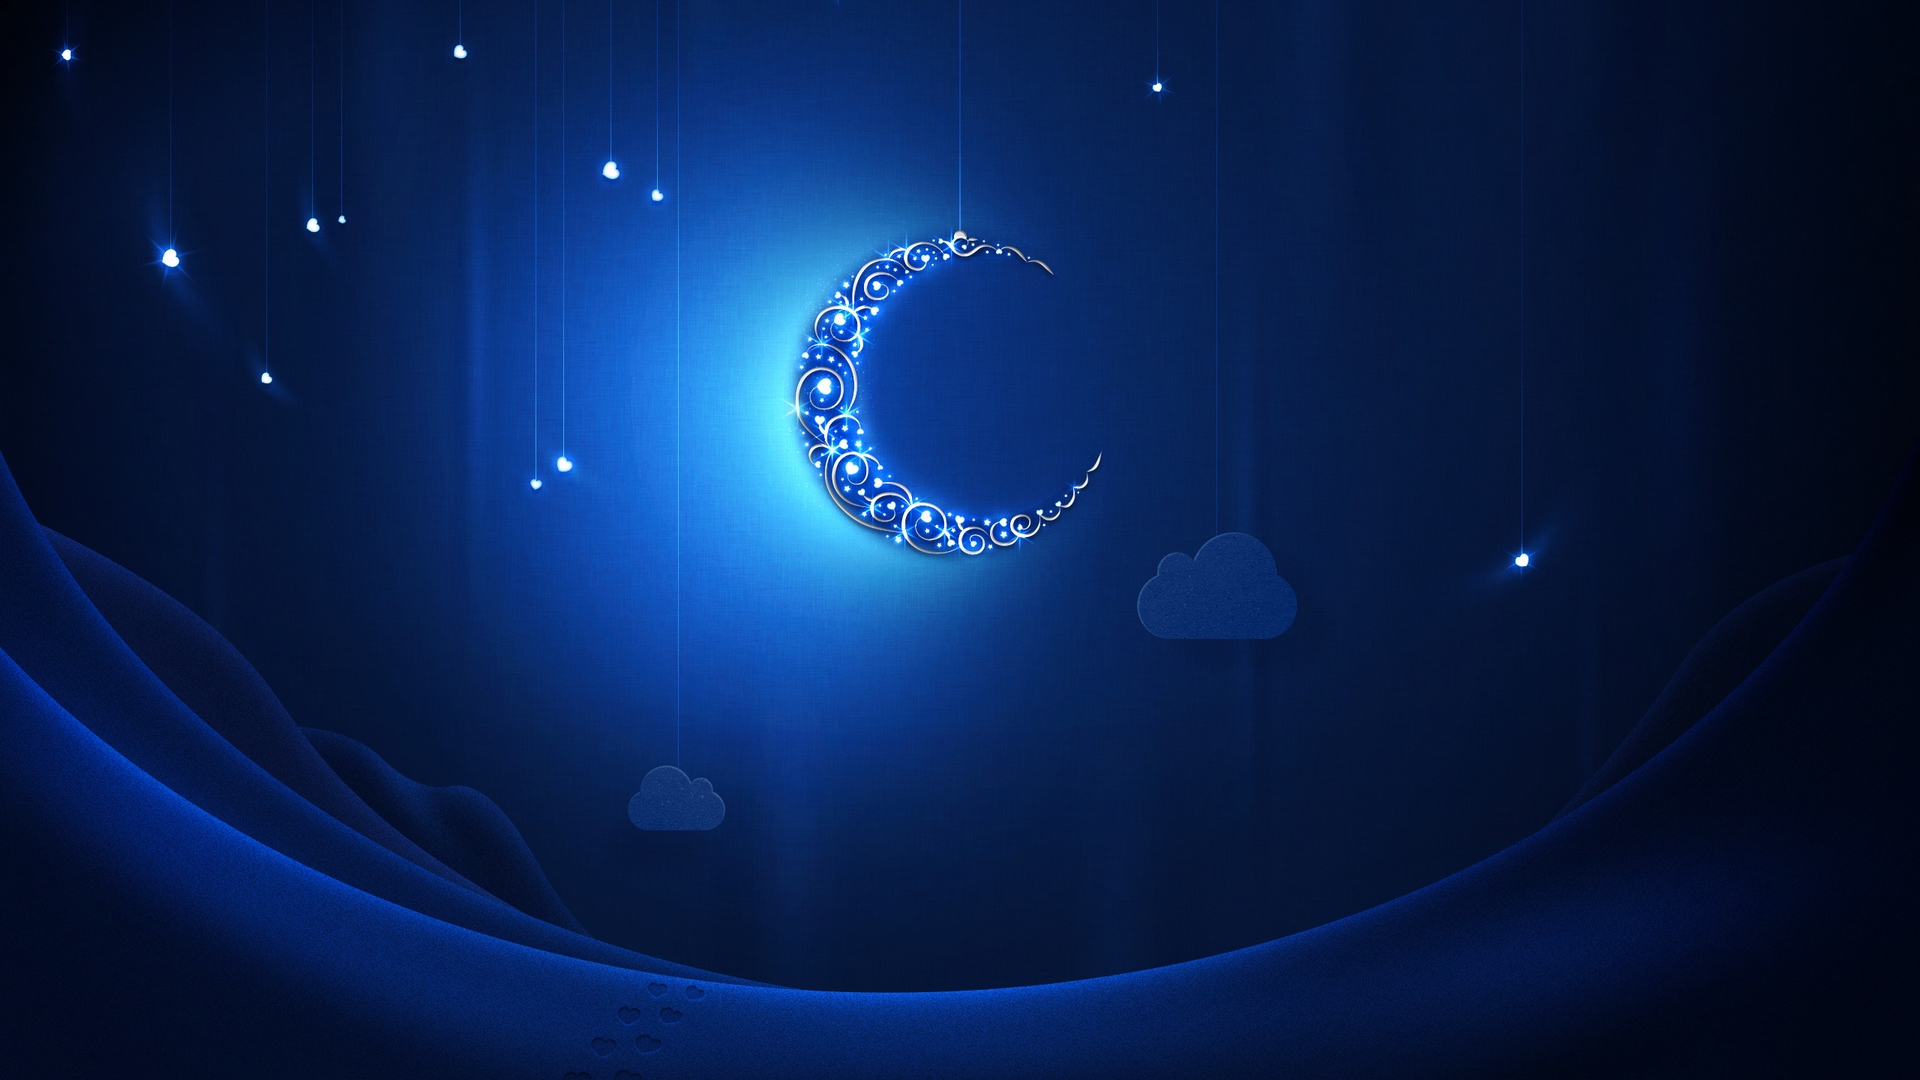 Blue Moon and Star Wallpaper